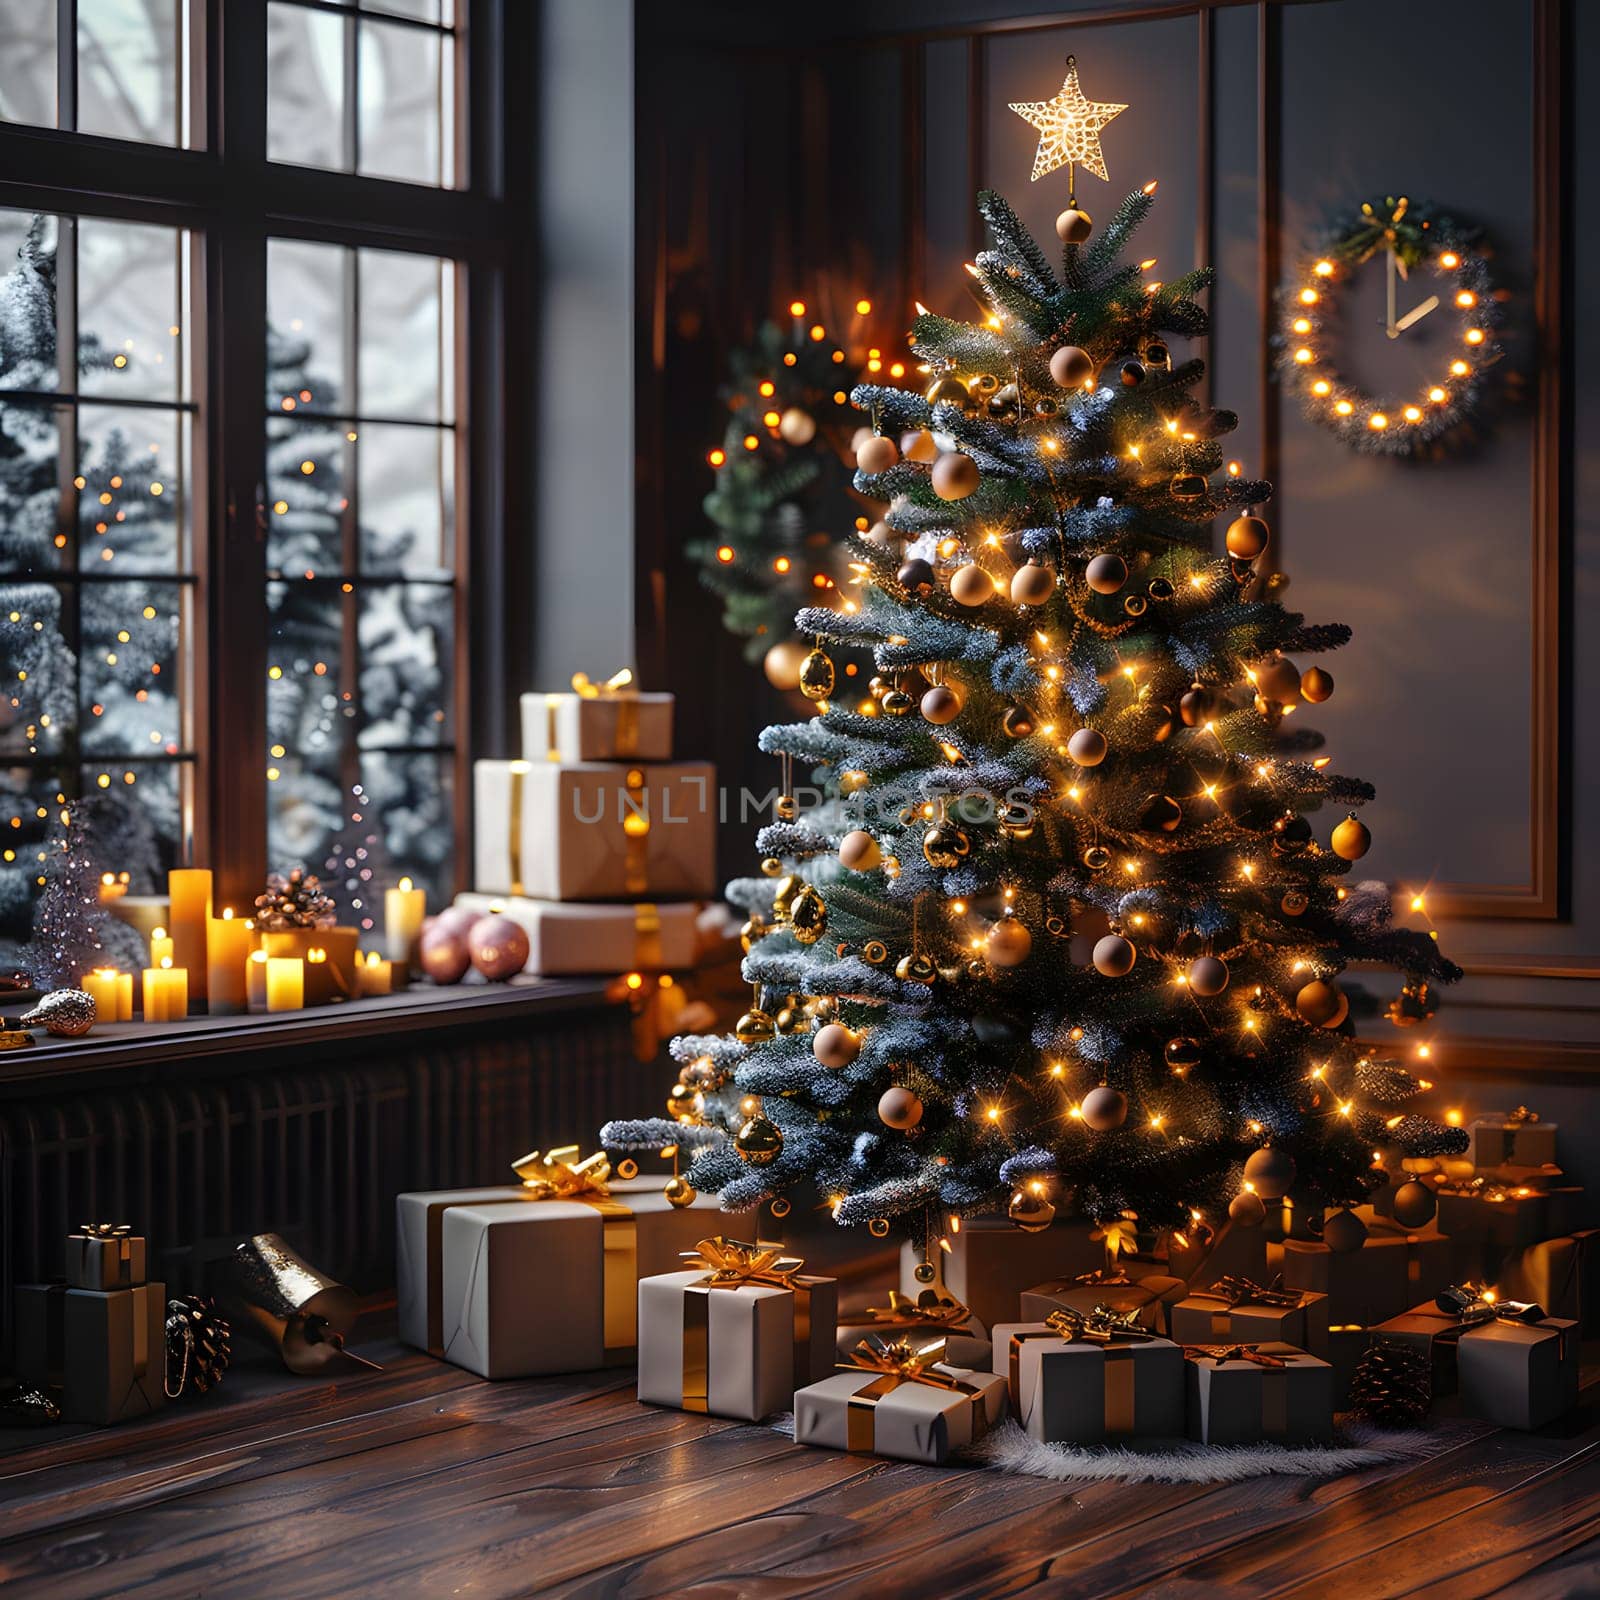 A Christmas tree in room with gifts underneath, adorned with holiday ornaments by Nadtochiy